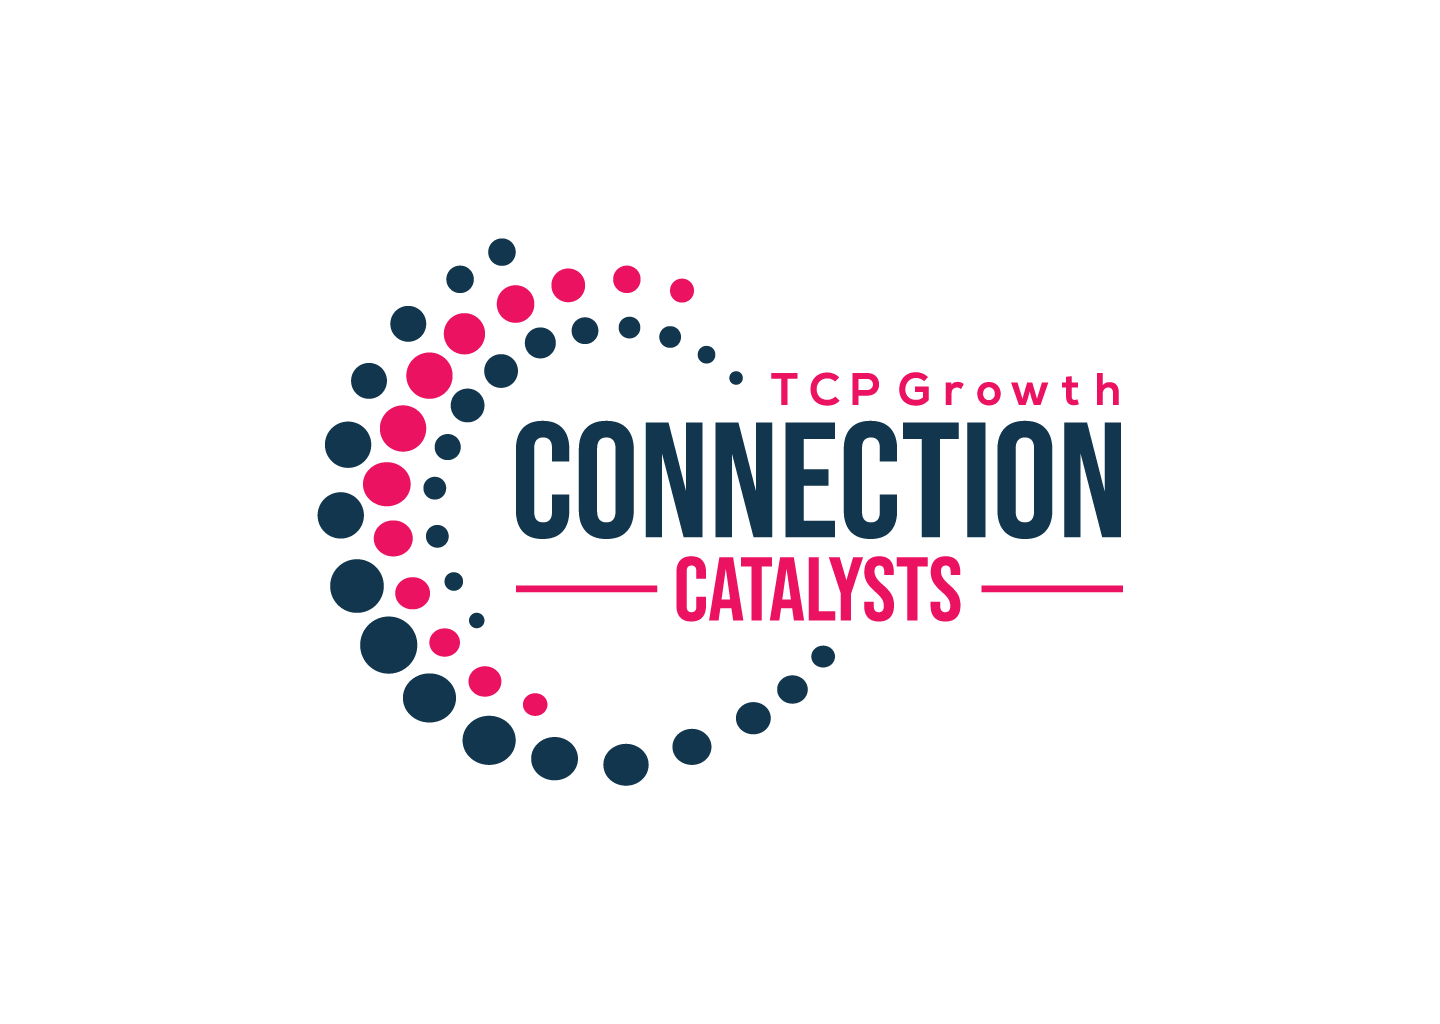 Connection Catalysts by TCP Growth